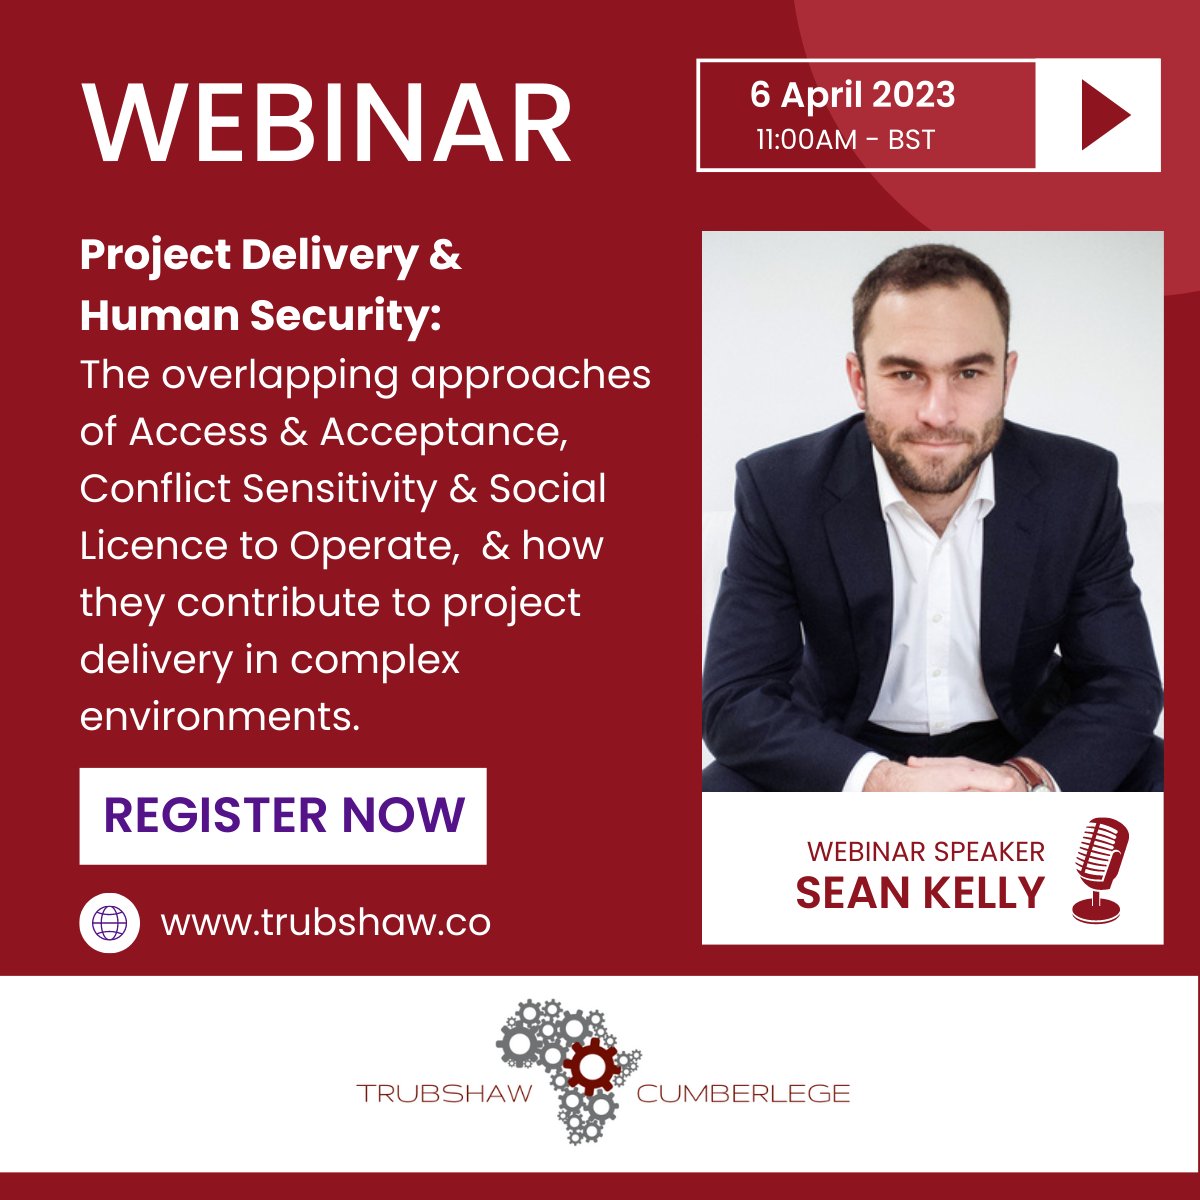 WEBINAR: Project Delivery & Human Security in challenging environments
Date & Time 📅 6 April 2023, 11:00AM - BST
Register Now ➡ zurl.co/02ns
#webinar #humansecurity #communityengagement #conflictsensitivity #projectdelivery